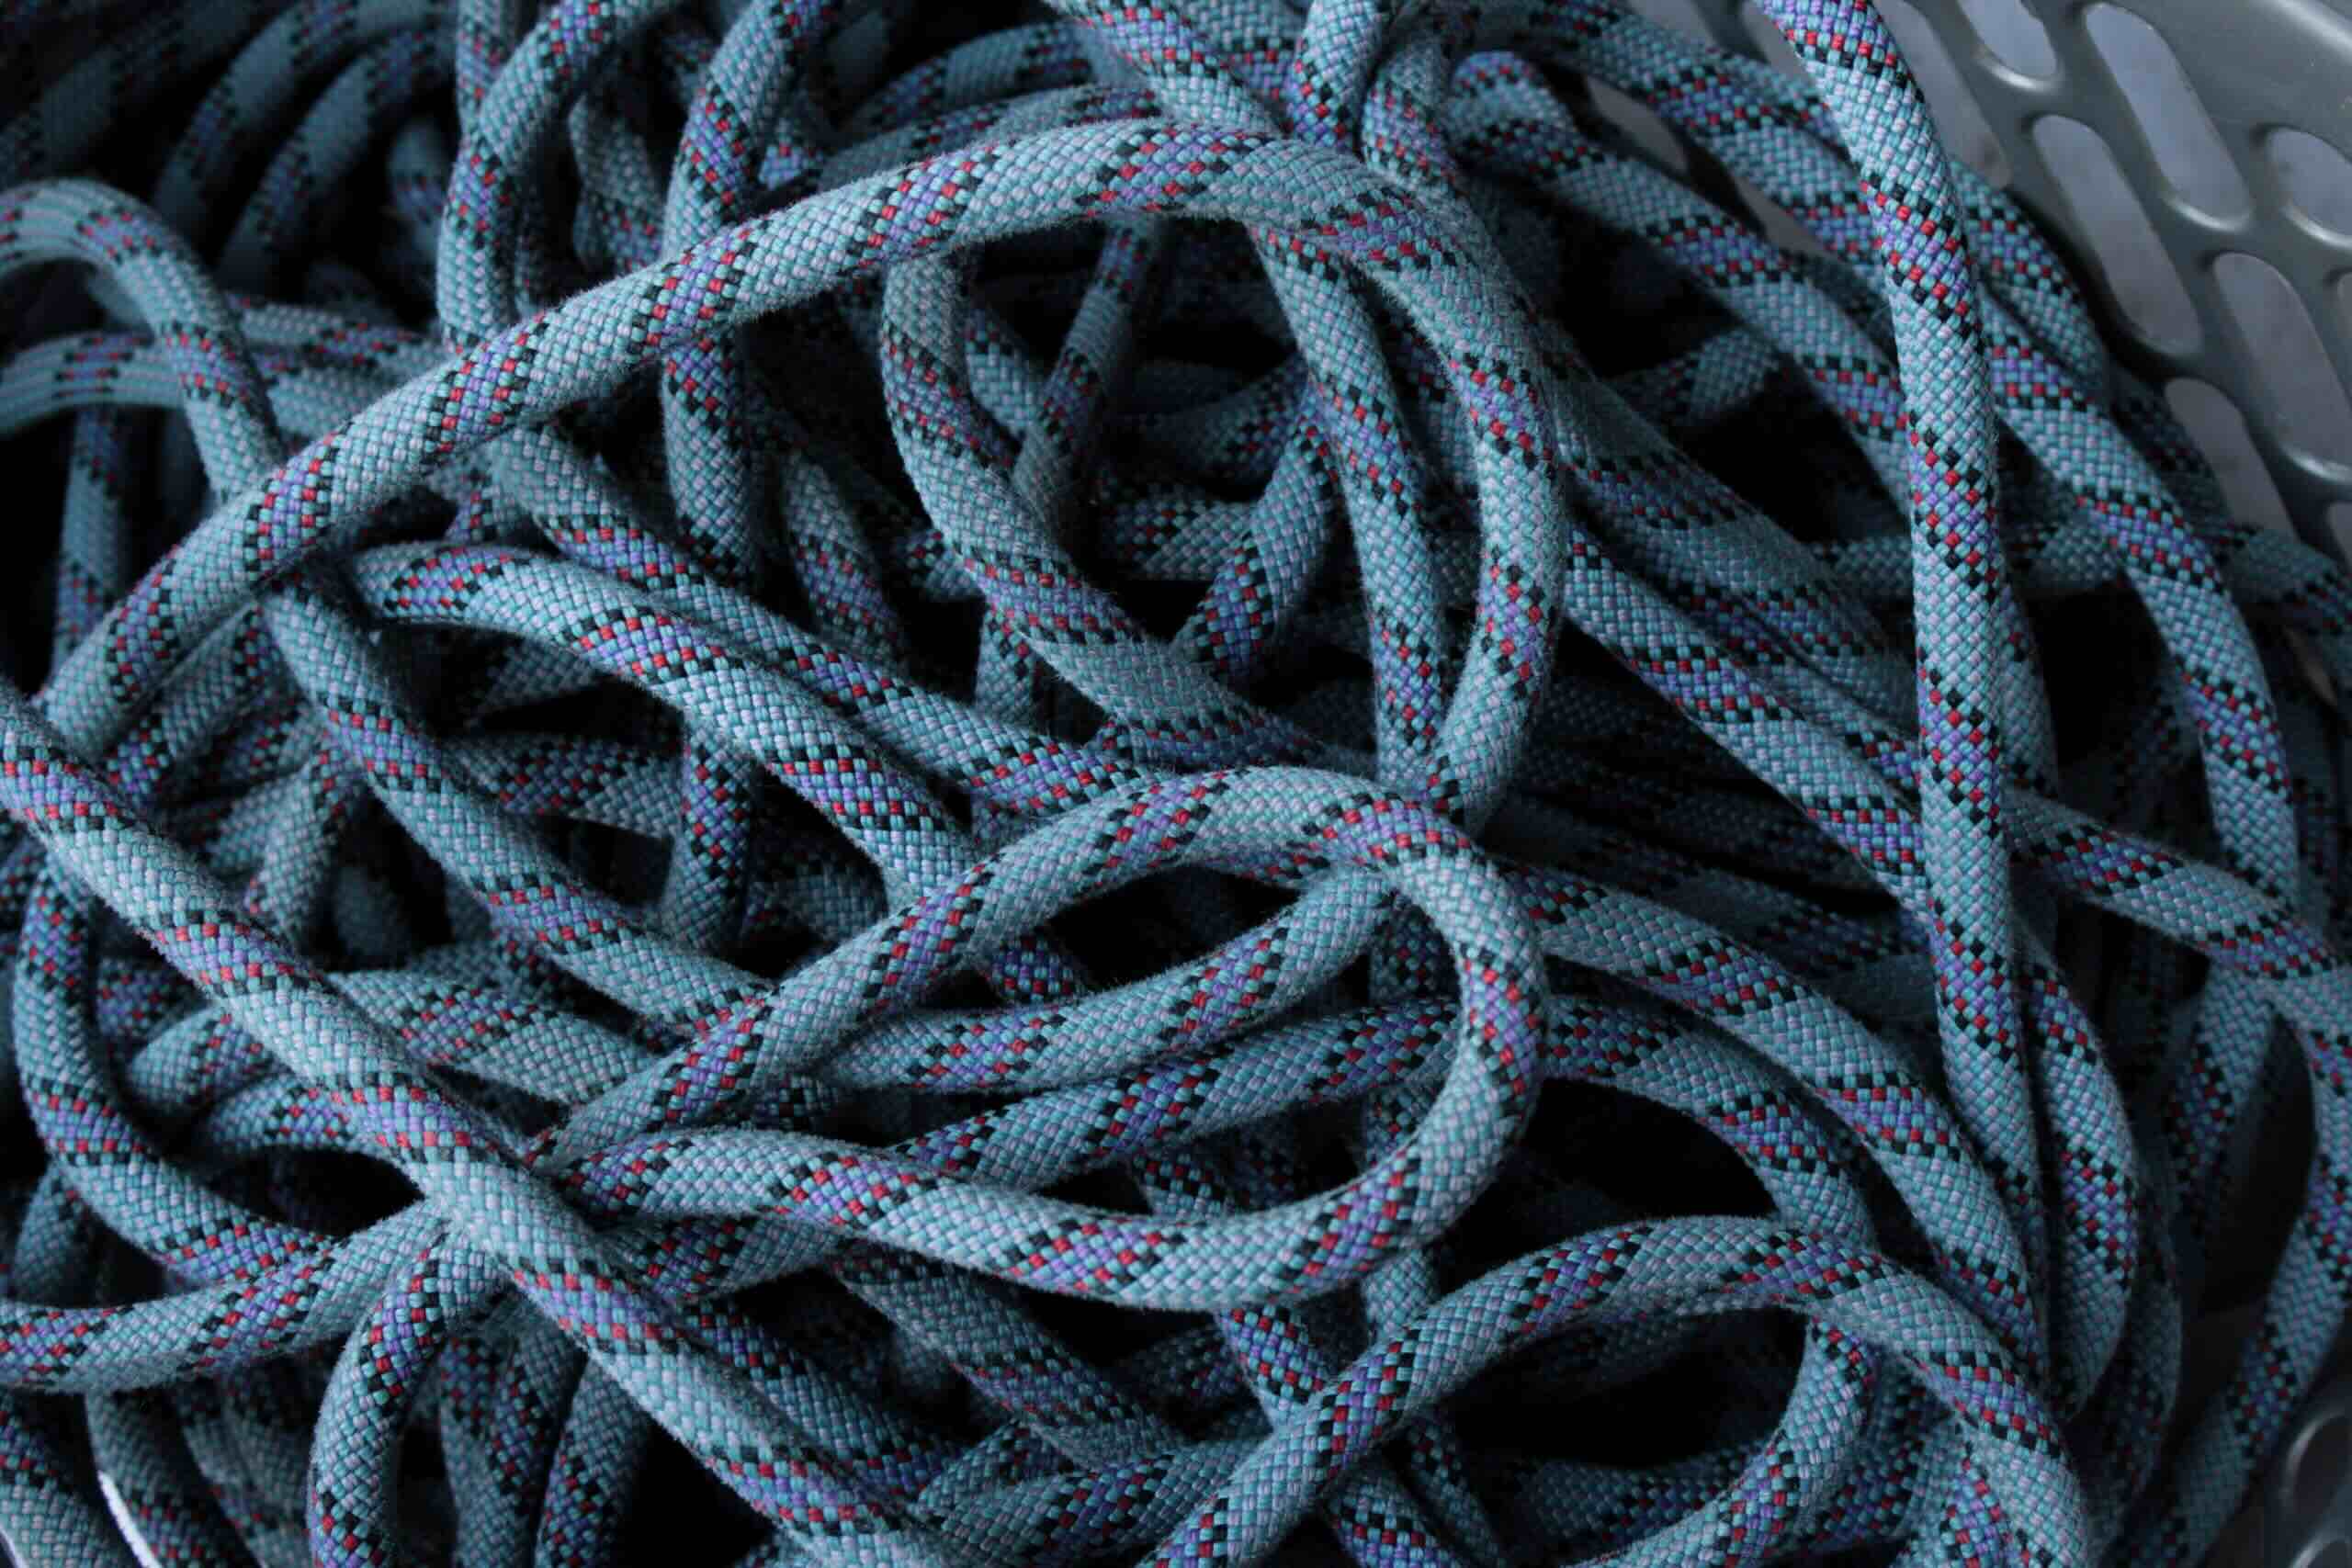 Climbing Rope Review: A Comprehensive Analysis